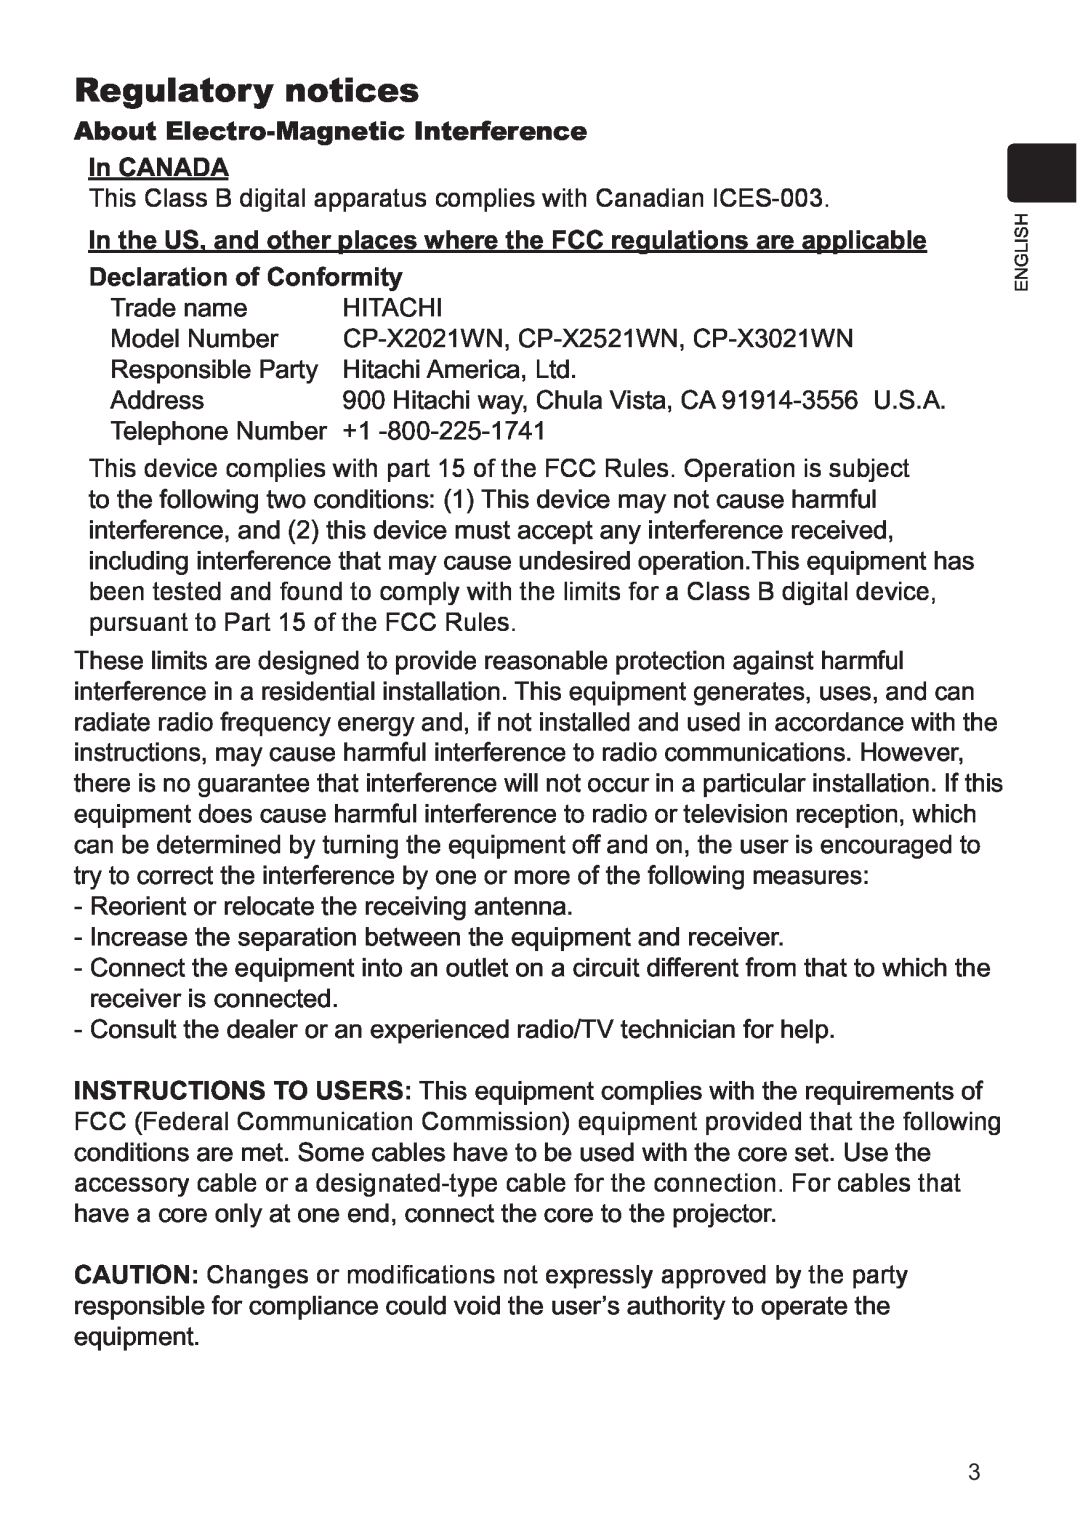 Hitachi CP-X3021WN, CP-X2521WN Regulatory notices, About Electro-MagneticInterference In CANADA, Declaration of Conformity 